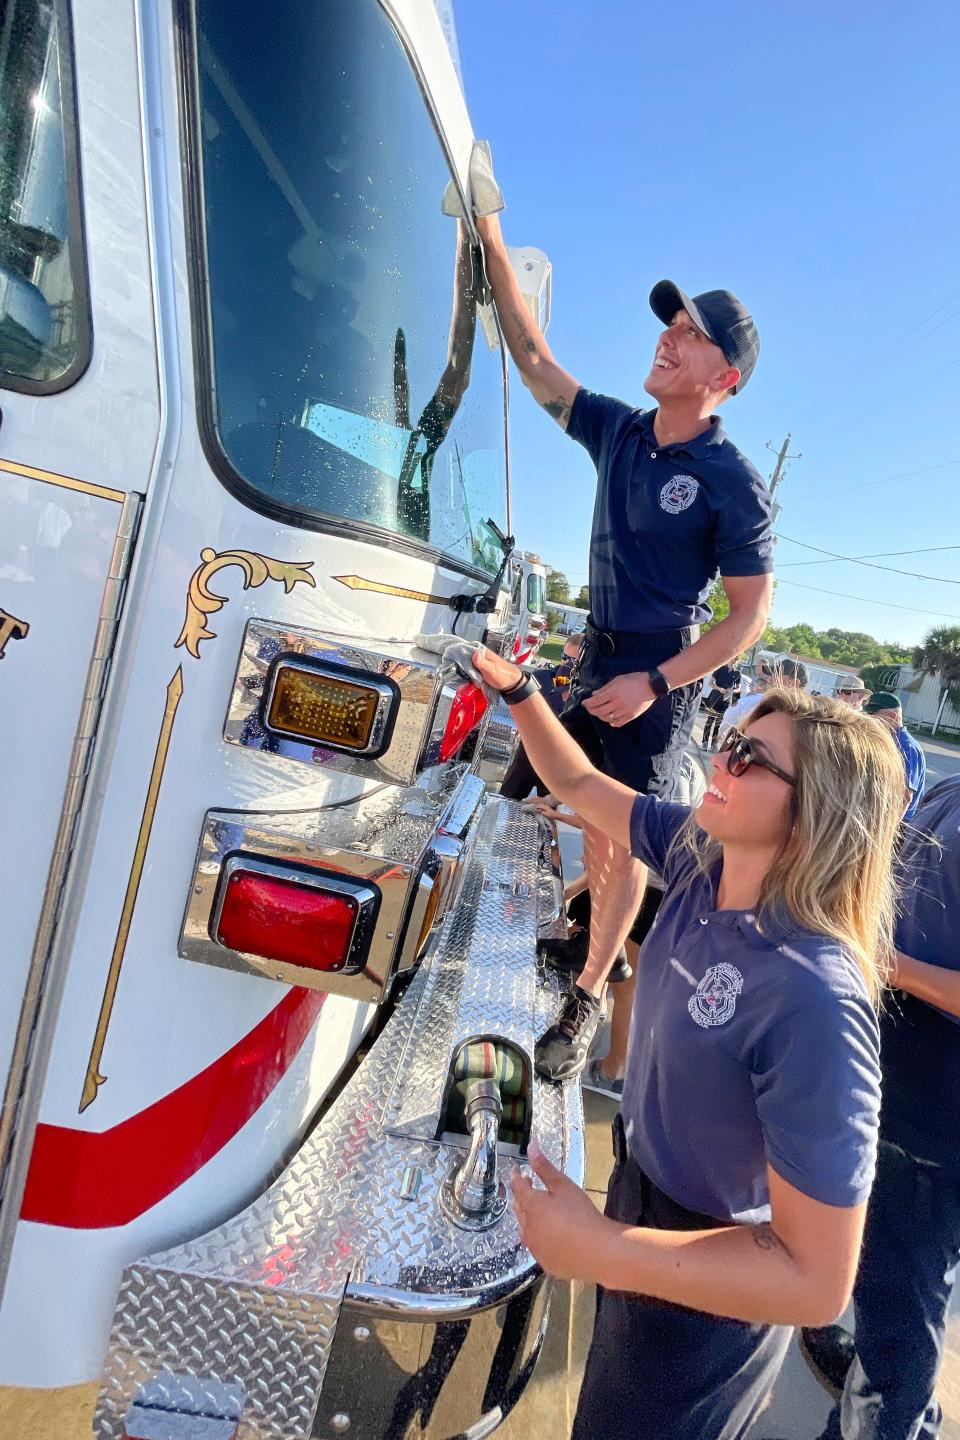 Ocean City-Wright Fire Control District Engineer Hannah Robertson and Firefighter/Paramedic Donovan Robertson wipe down the department's new fire engine during a ceremony Tuesday evening at the Racetrack Road station.